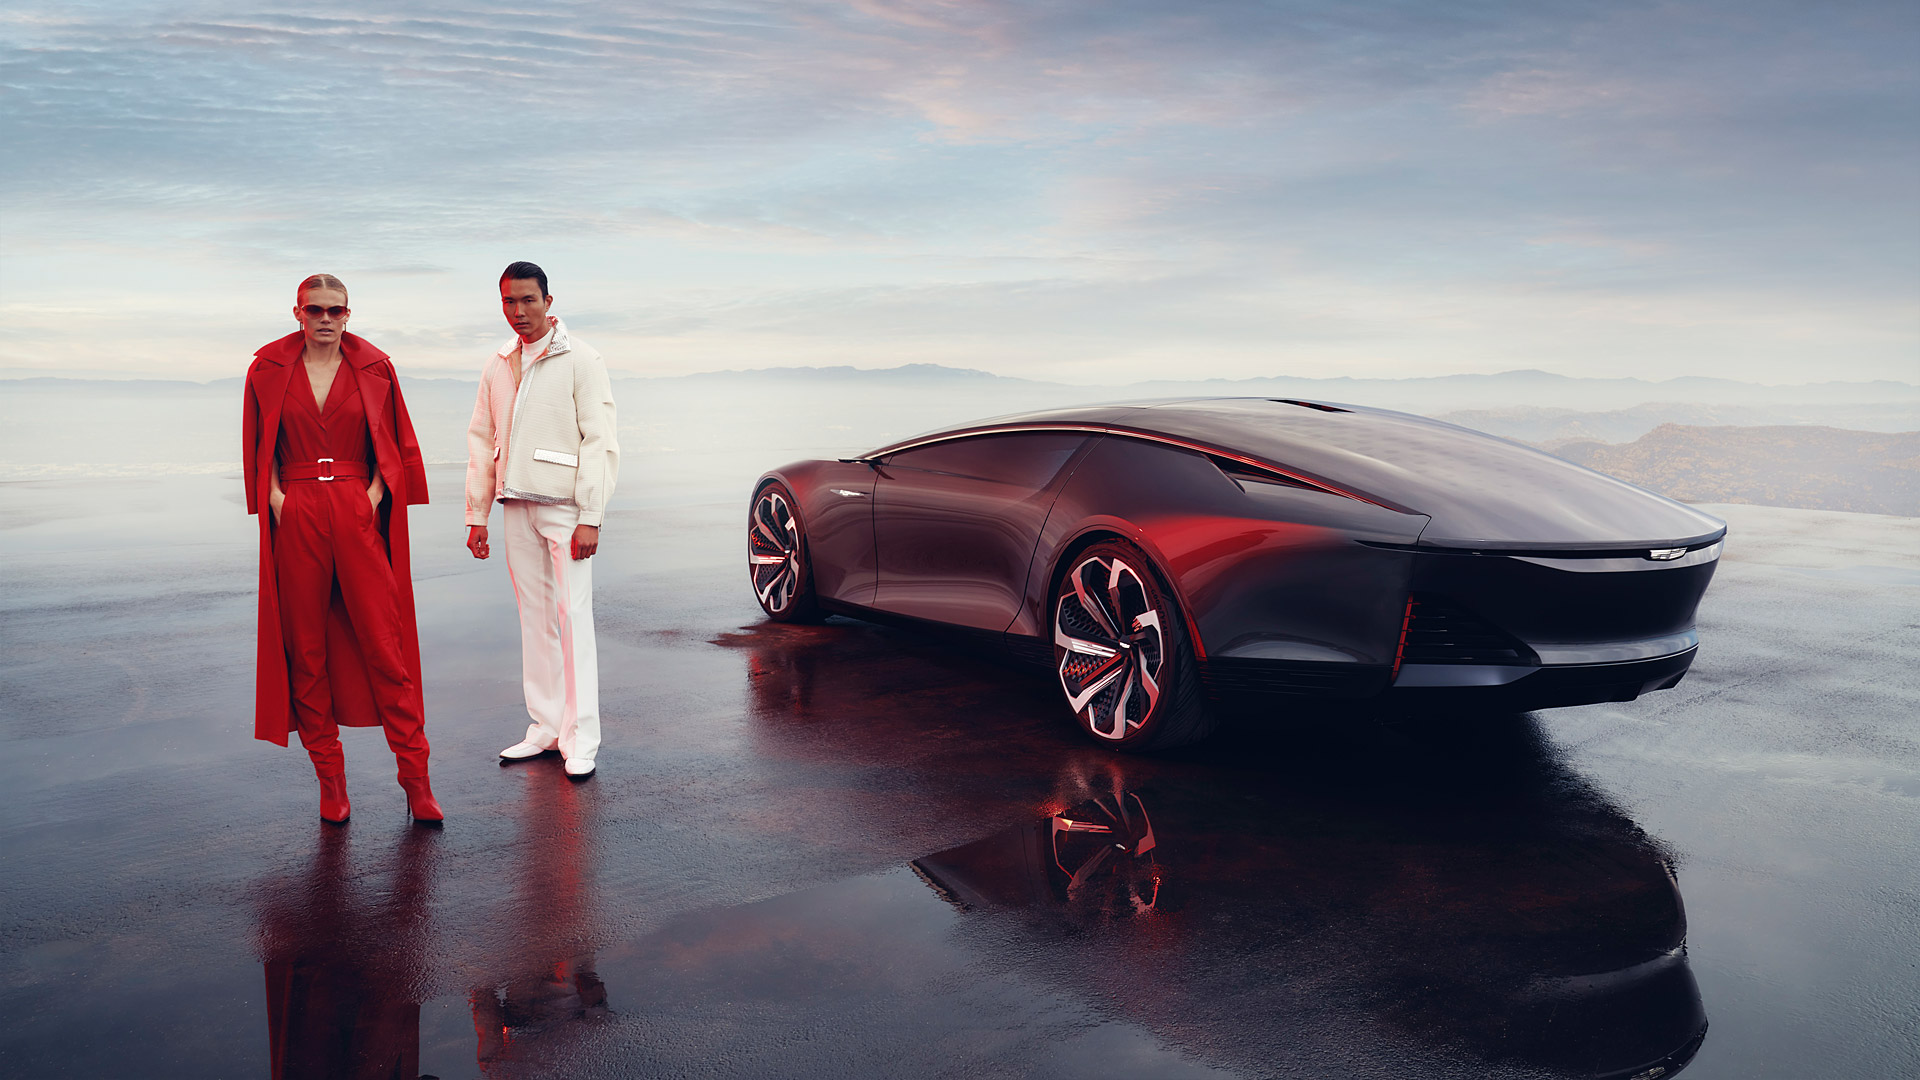  2022 Cadillac InnerSpace Concept Wallpaper.